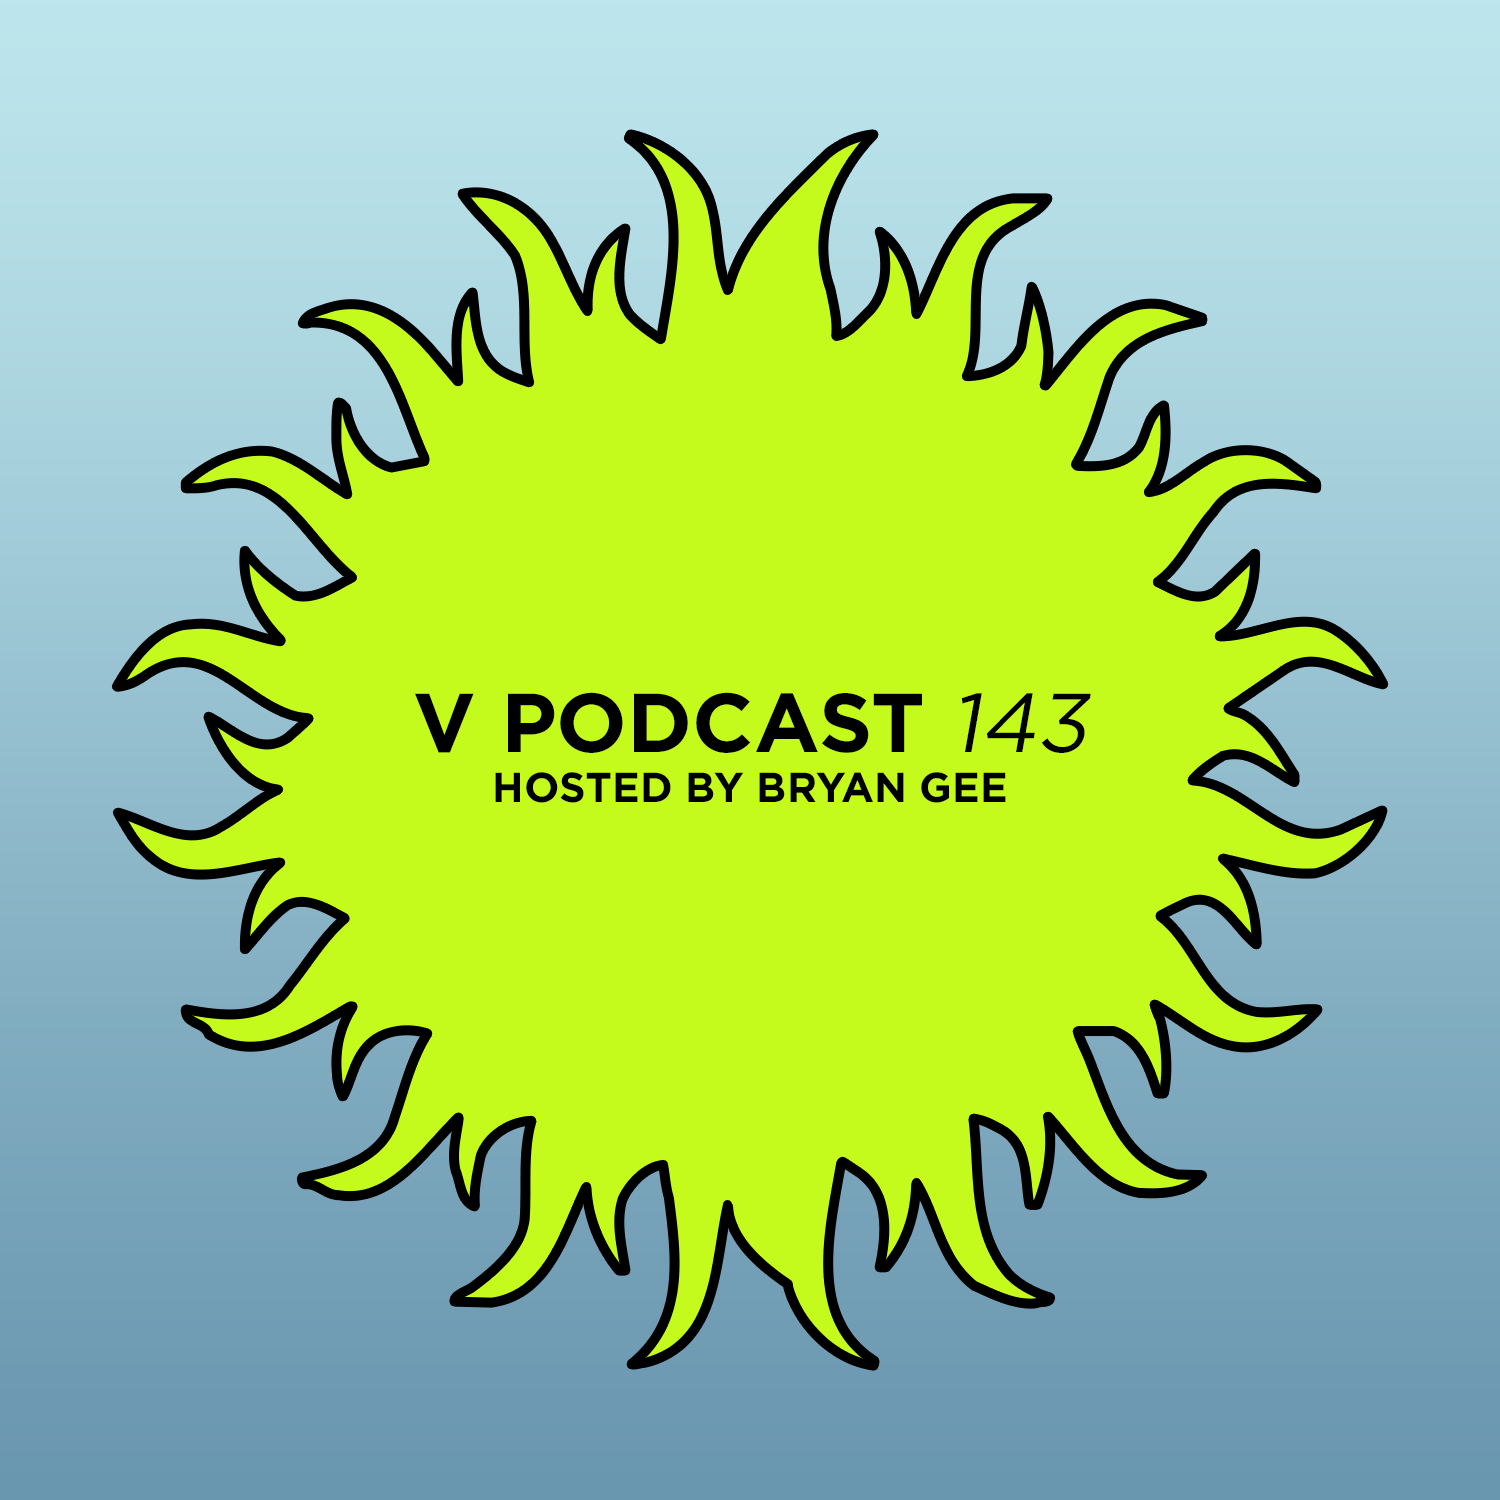 V Podcast 143 - Hosted by Bryan Gee Artwork